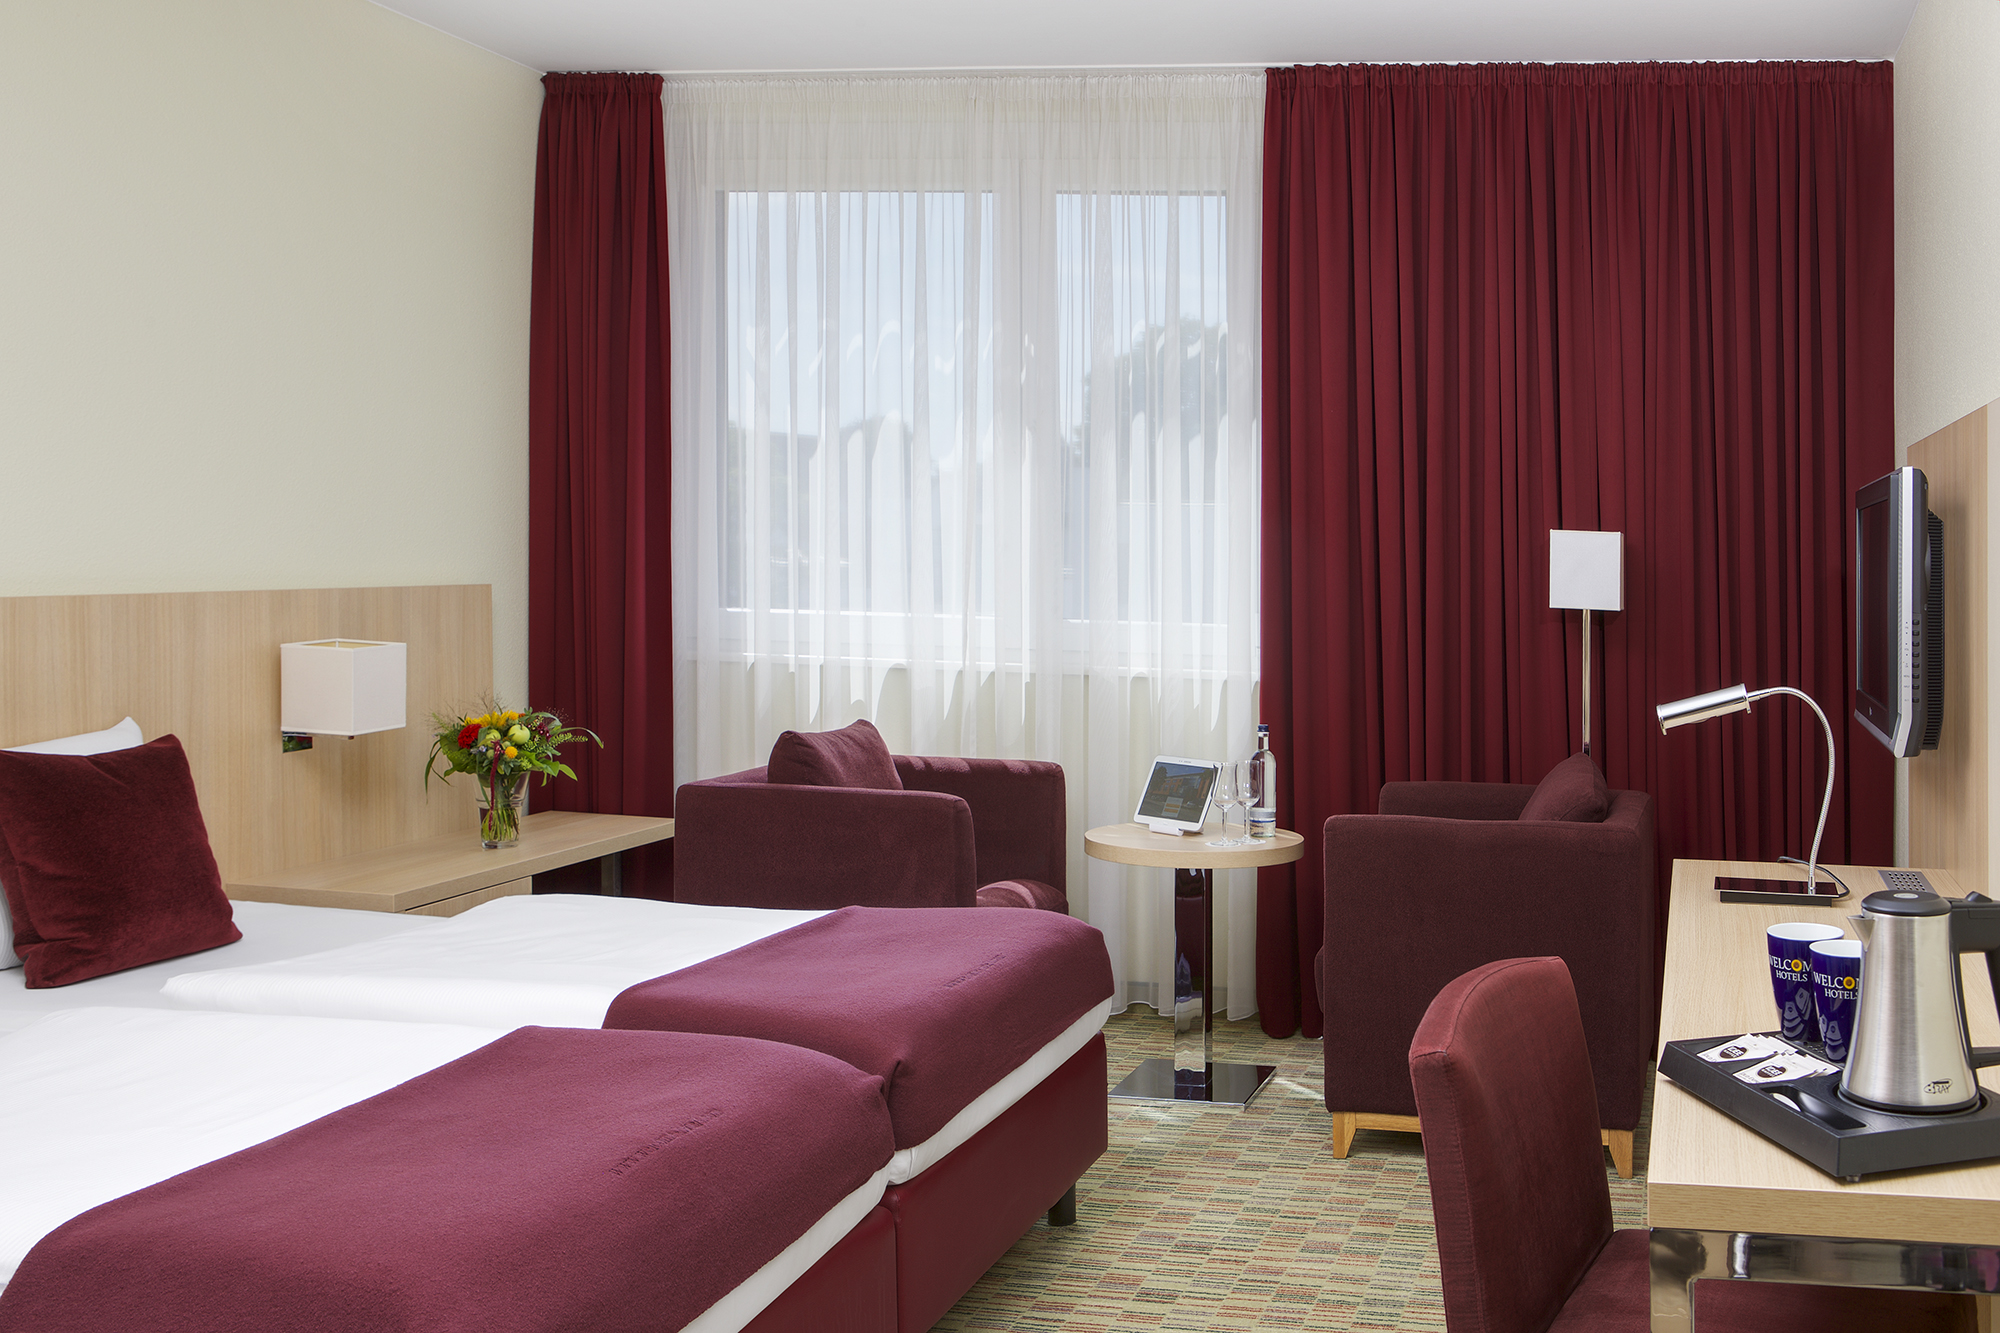 Executive Zimmer im Welcome Hotel, Paderborn.
